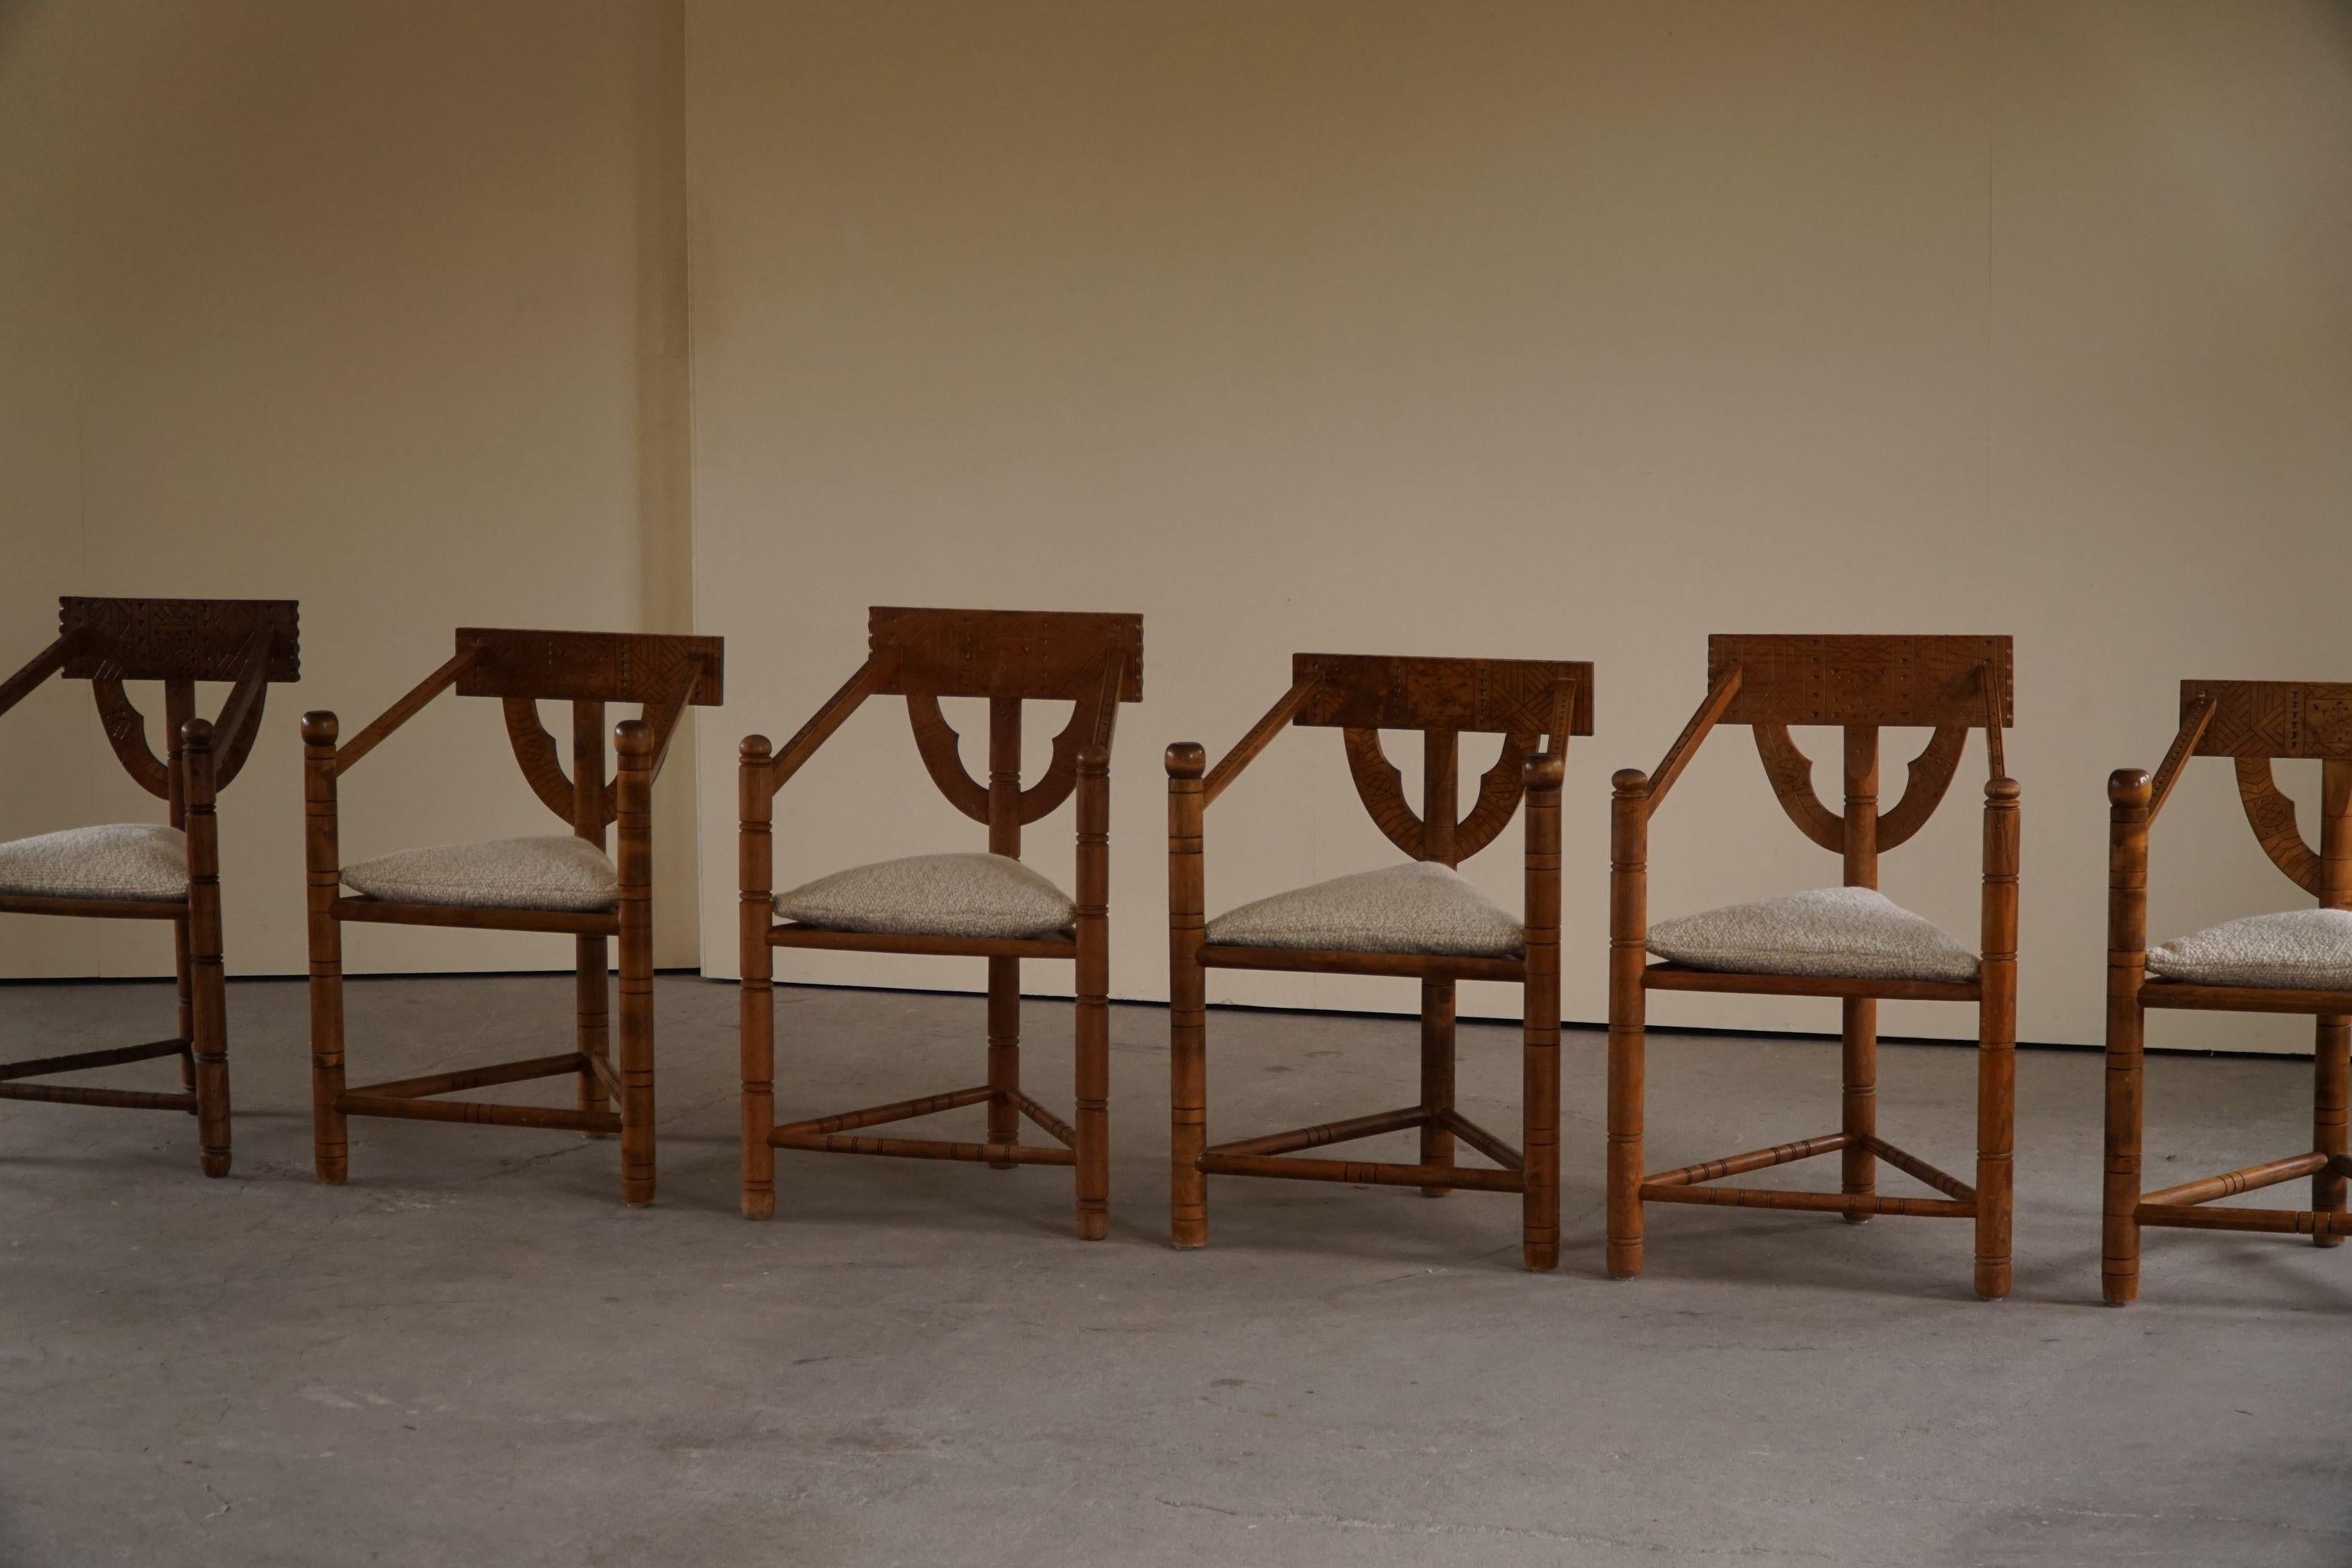 Set of 6 Swedish Monk Chairs with Bouclé Seats, Wabi Sabi, Early 20th Century For Sale 1